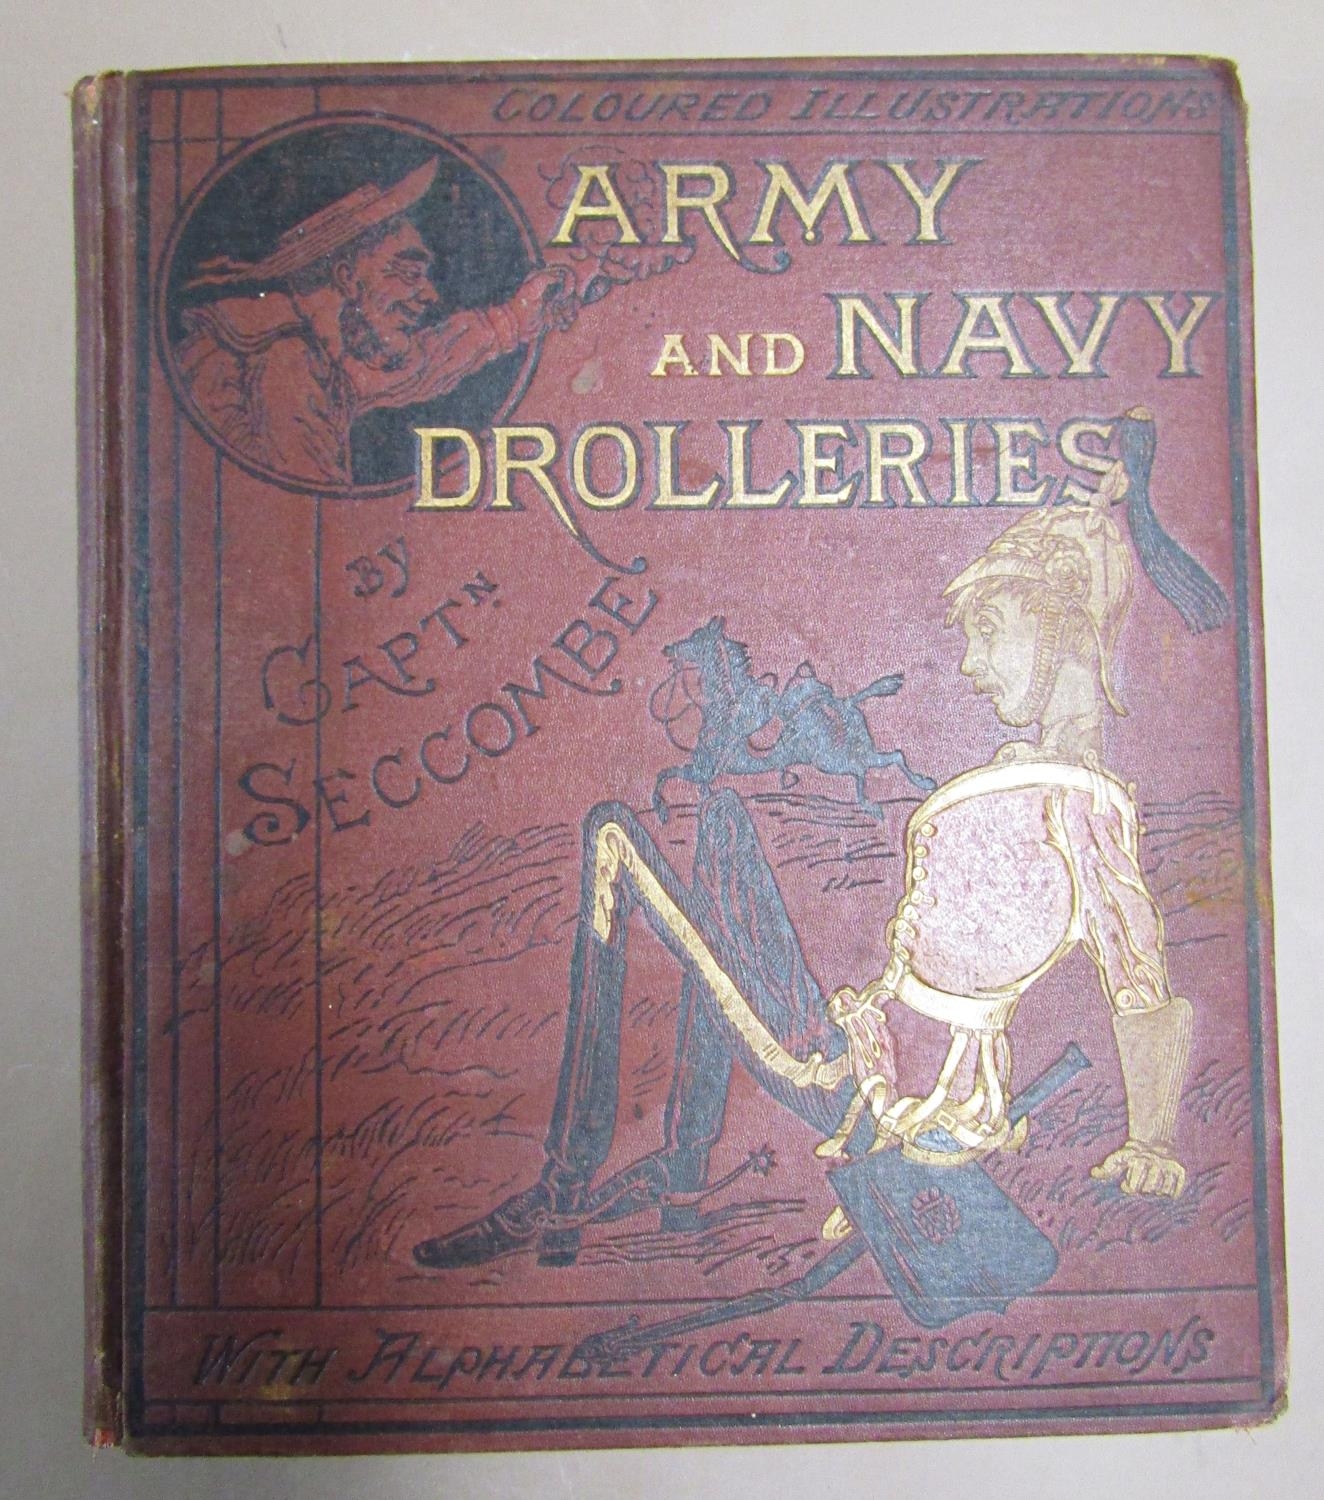 Army & Navy Drolleries by Captain Seccombe circa 1890, humorous coloured illustrations